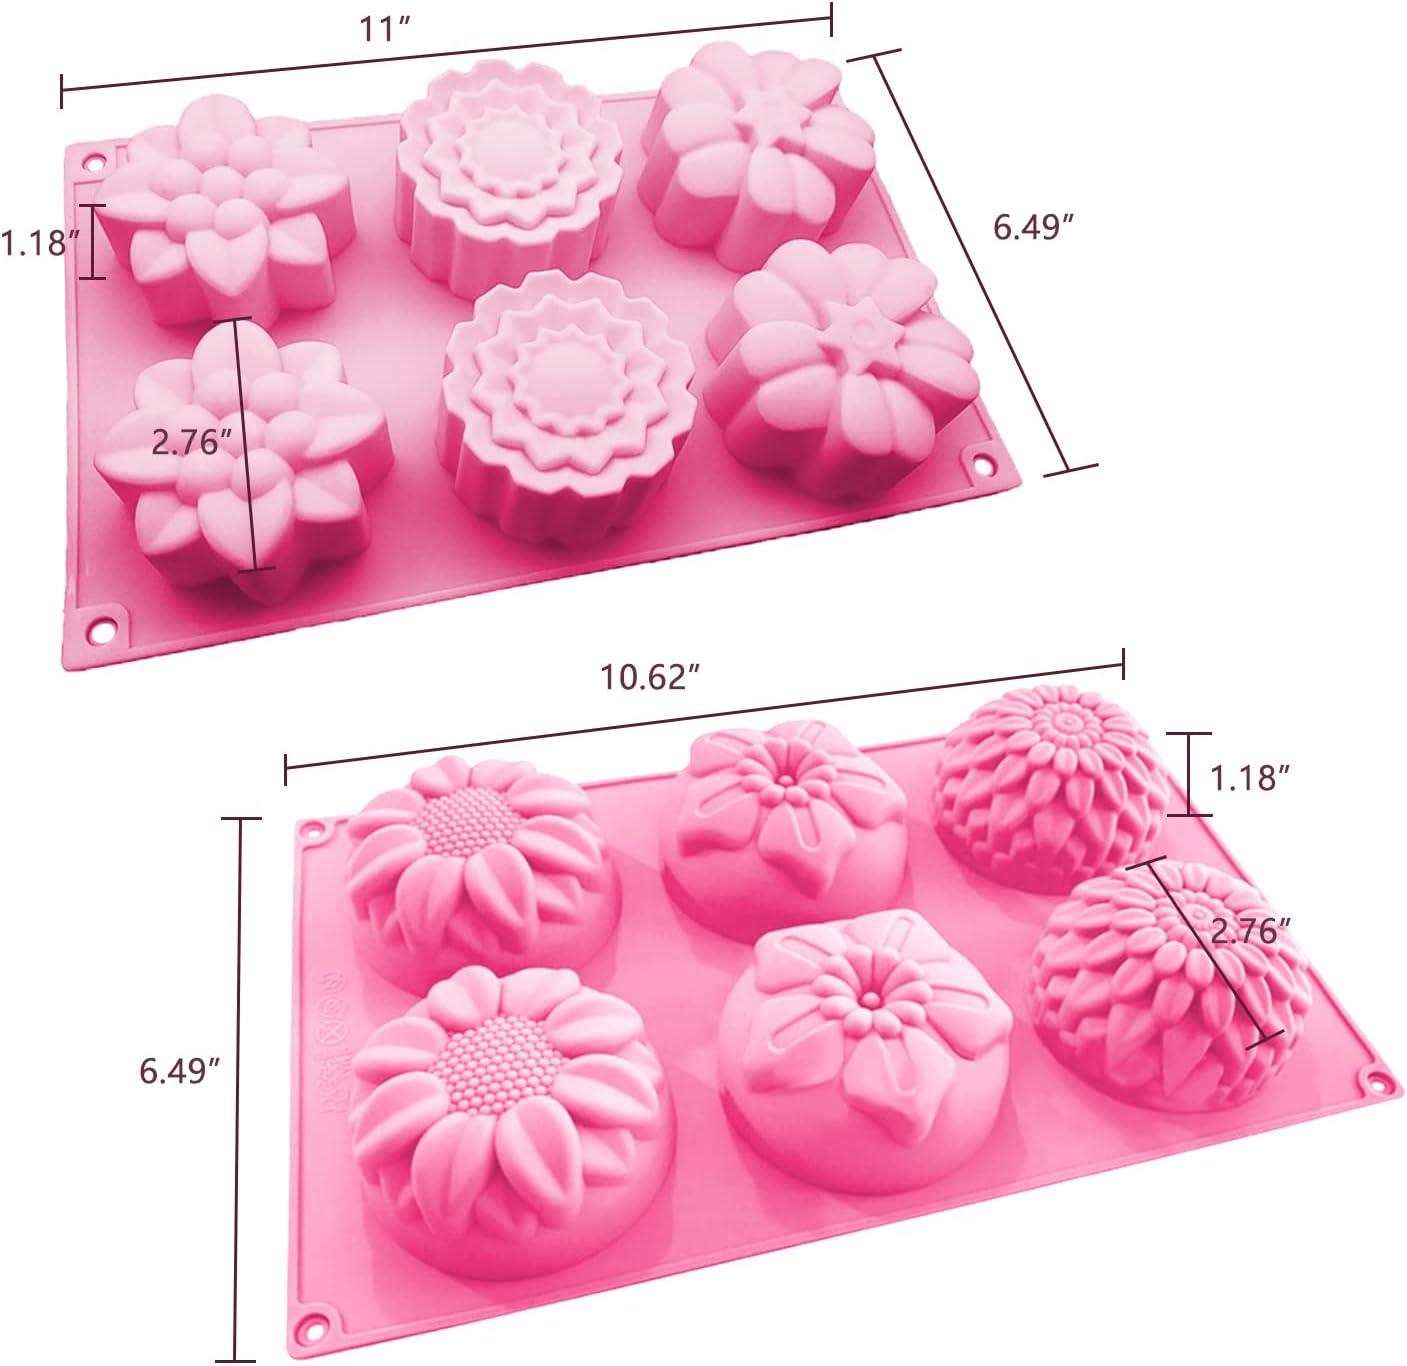 Set of 3, 6 Cavities DIY Handmade Soap Moulds - Cake Pan Molds for